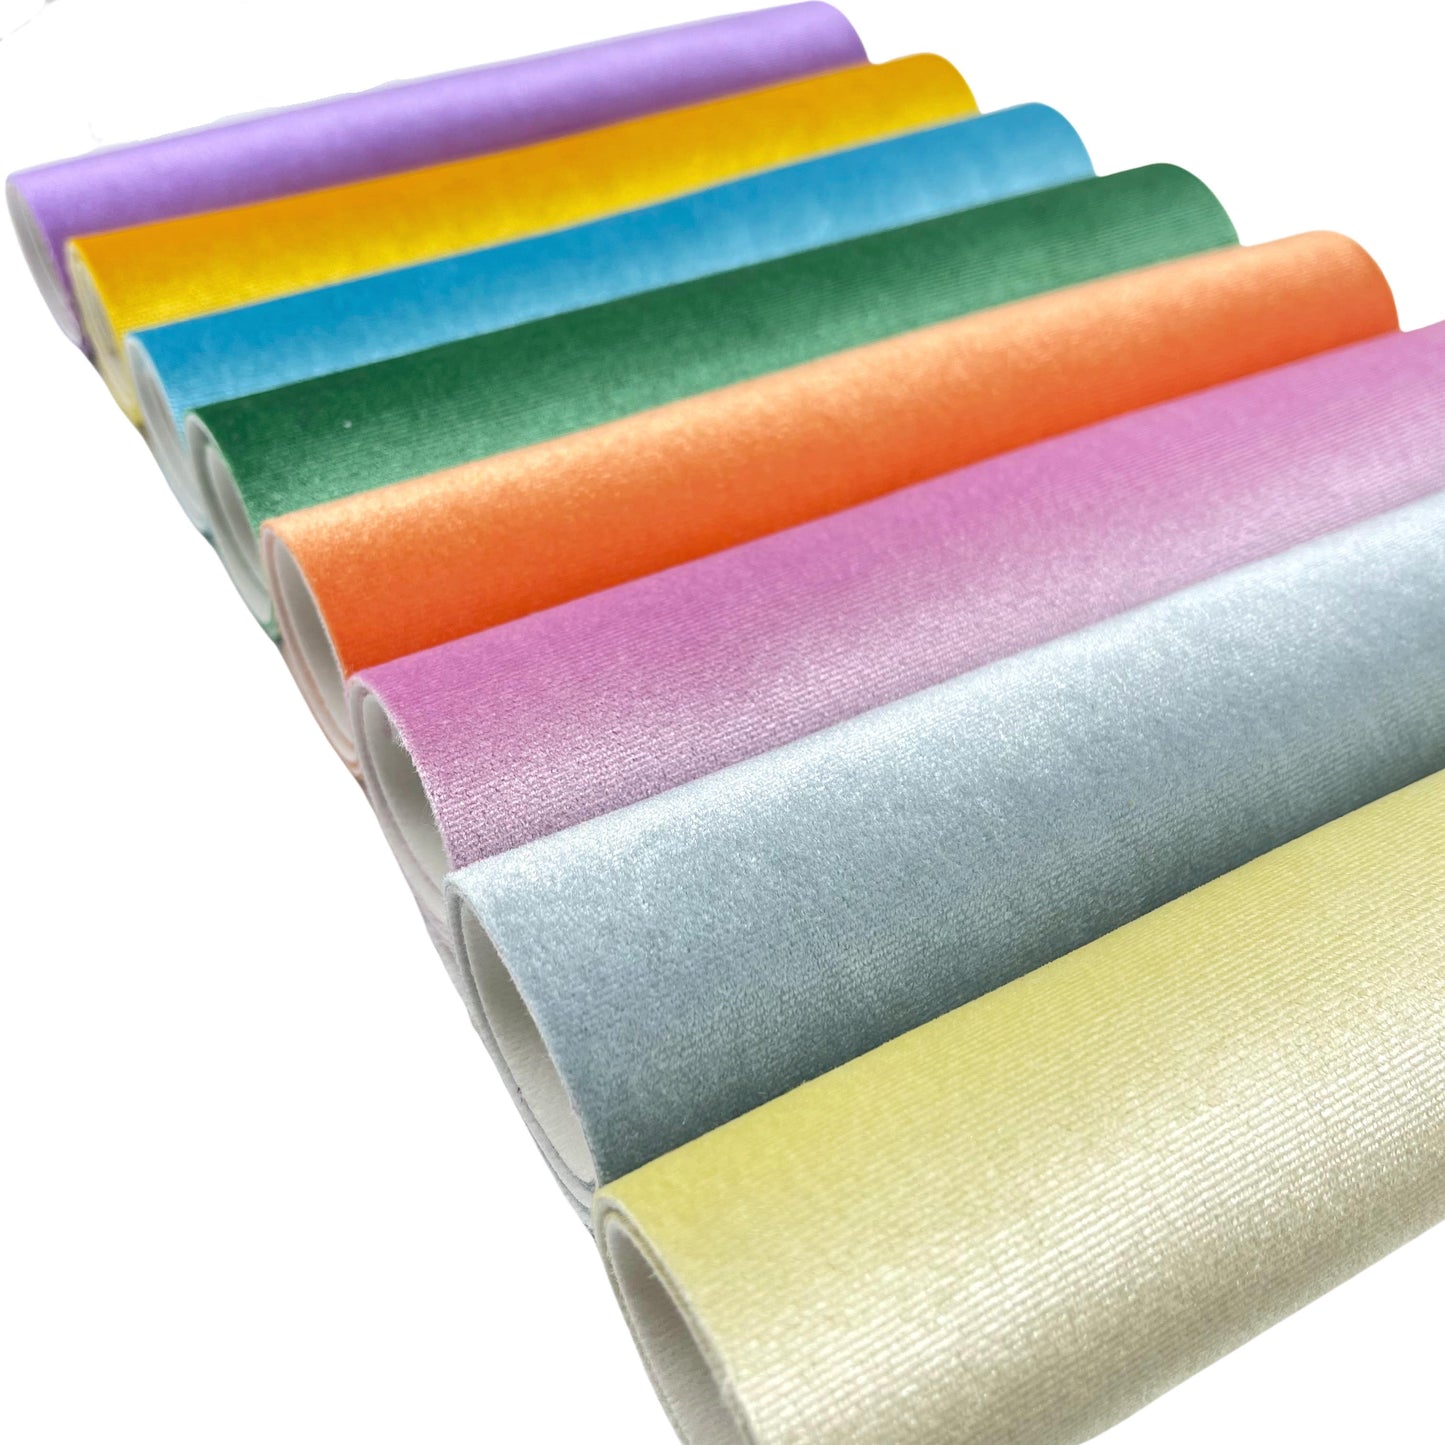 Rolled solid velvet faux leather fabric sheets in purple, yellow, blue, green, orange, pink, grey, and pale yellow.